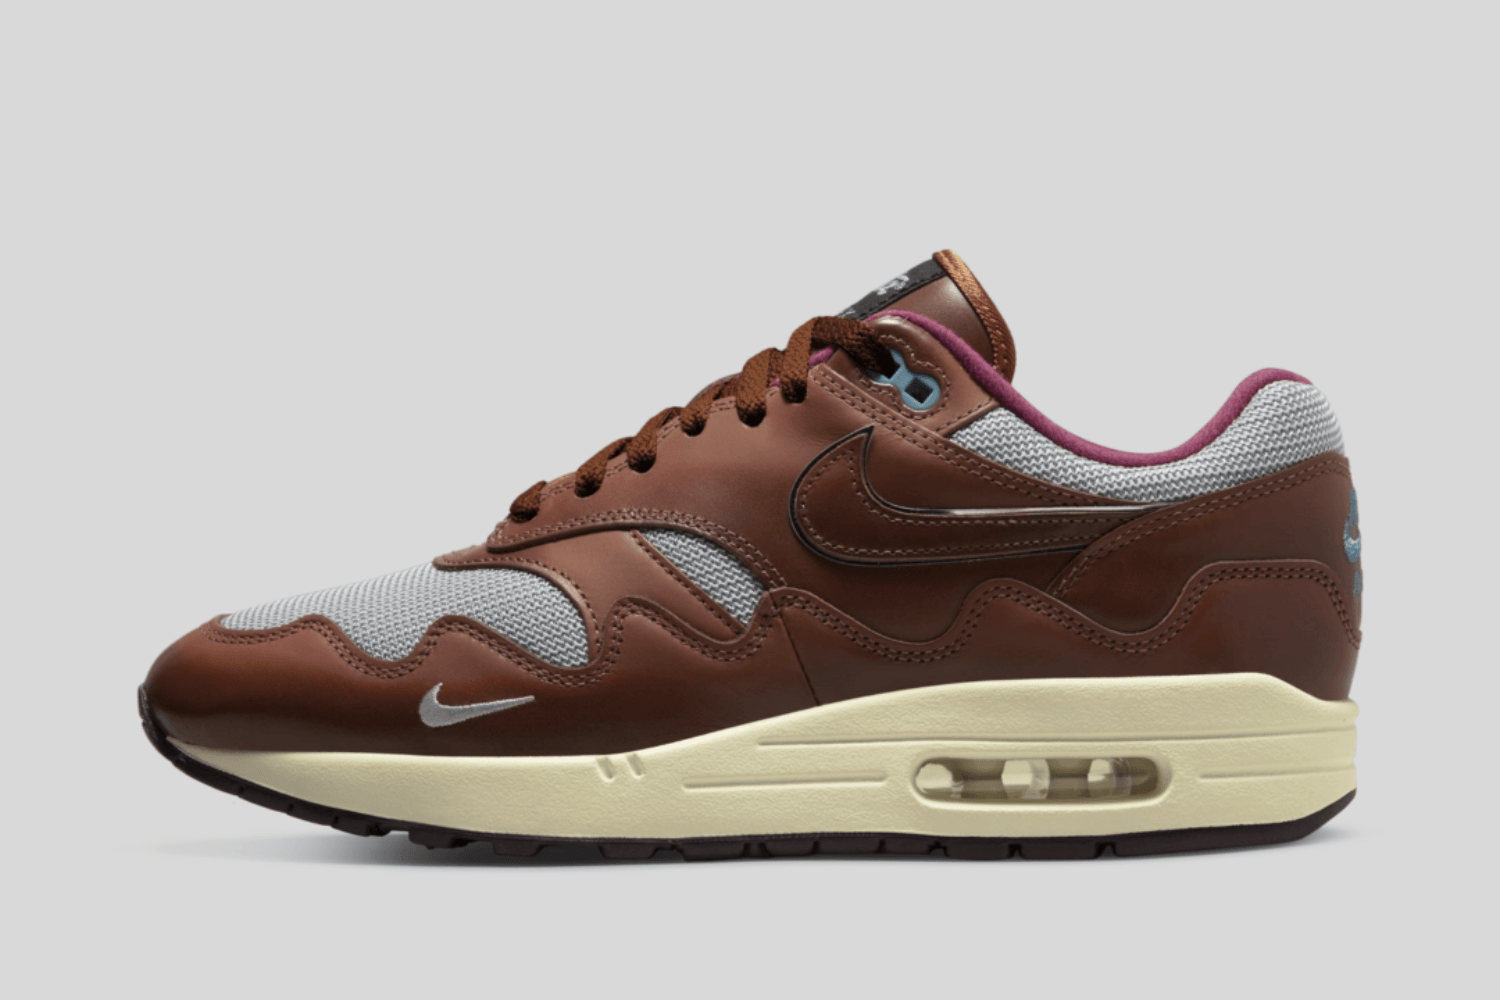 Official images of the Patta x Nike Air Max 1 'Orange'